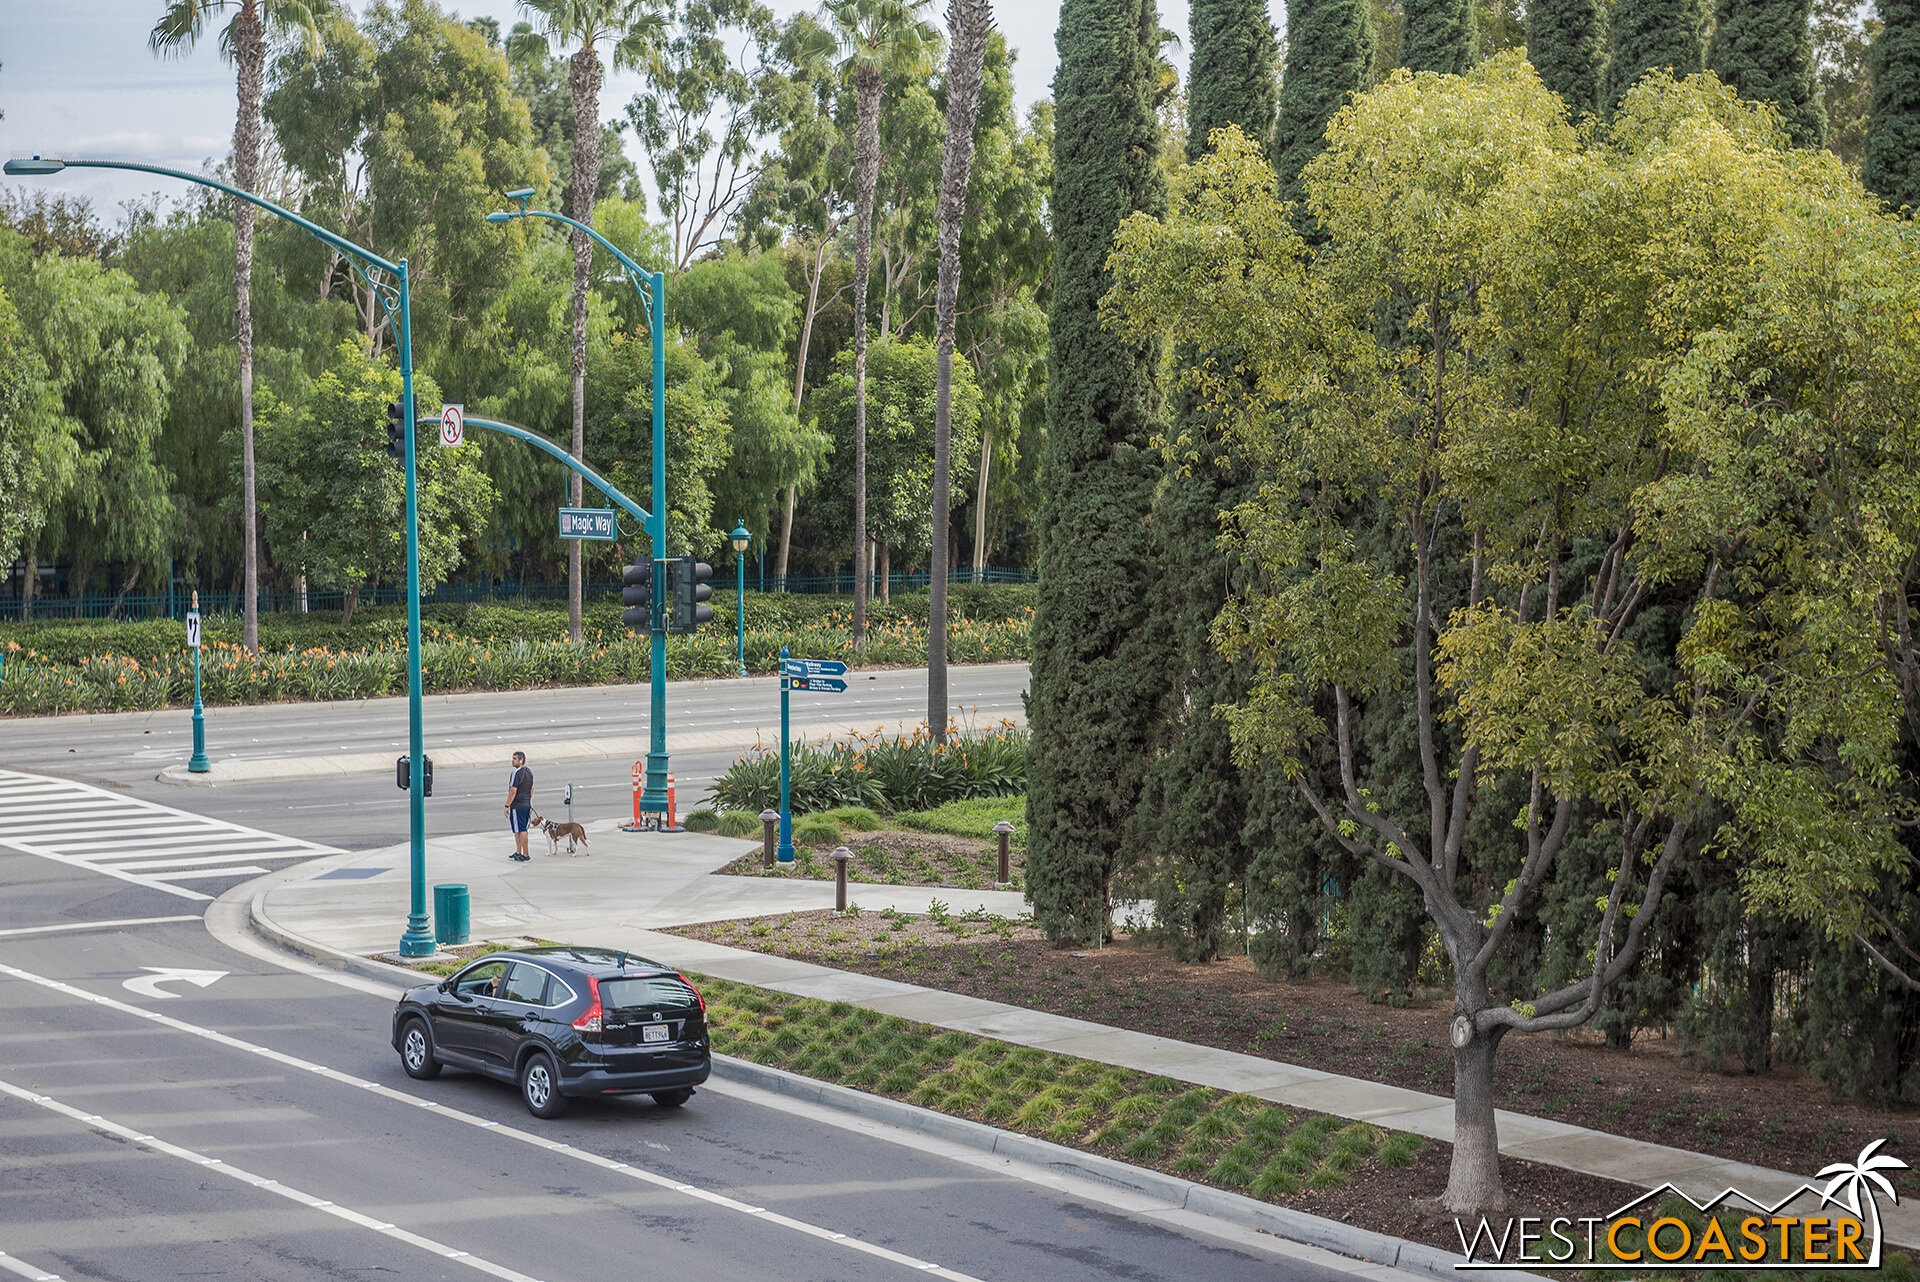  There’s also a connecting pathway at the corner of Disneyland Drive and Magic Way. 